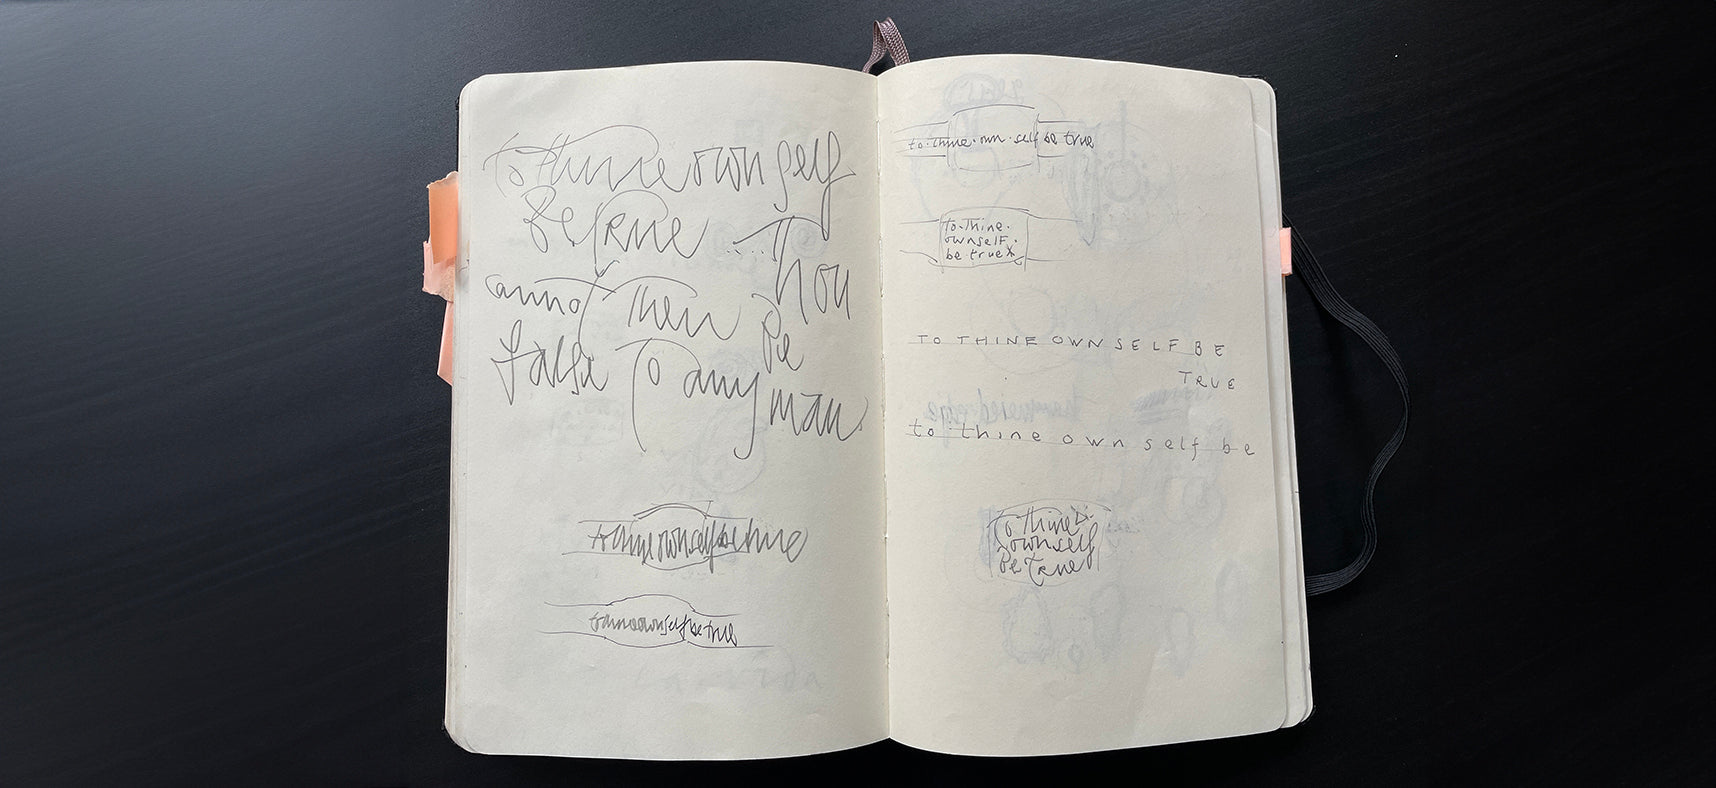 A sketch book page showing Wright & Teague caligraphy development.